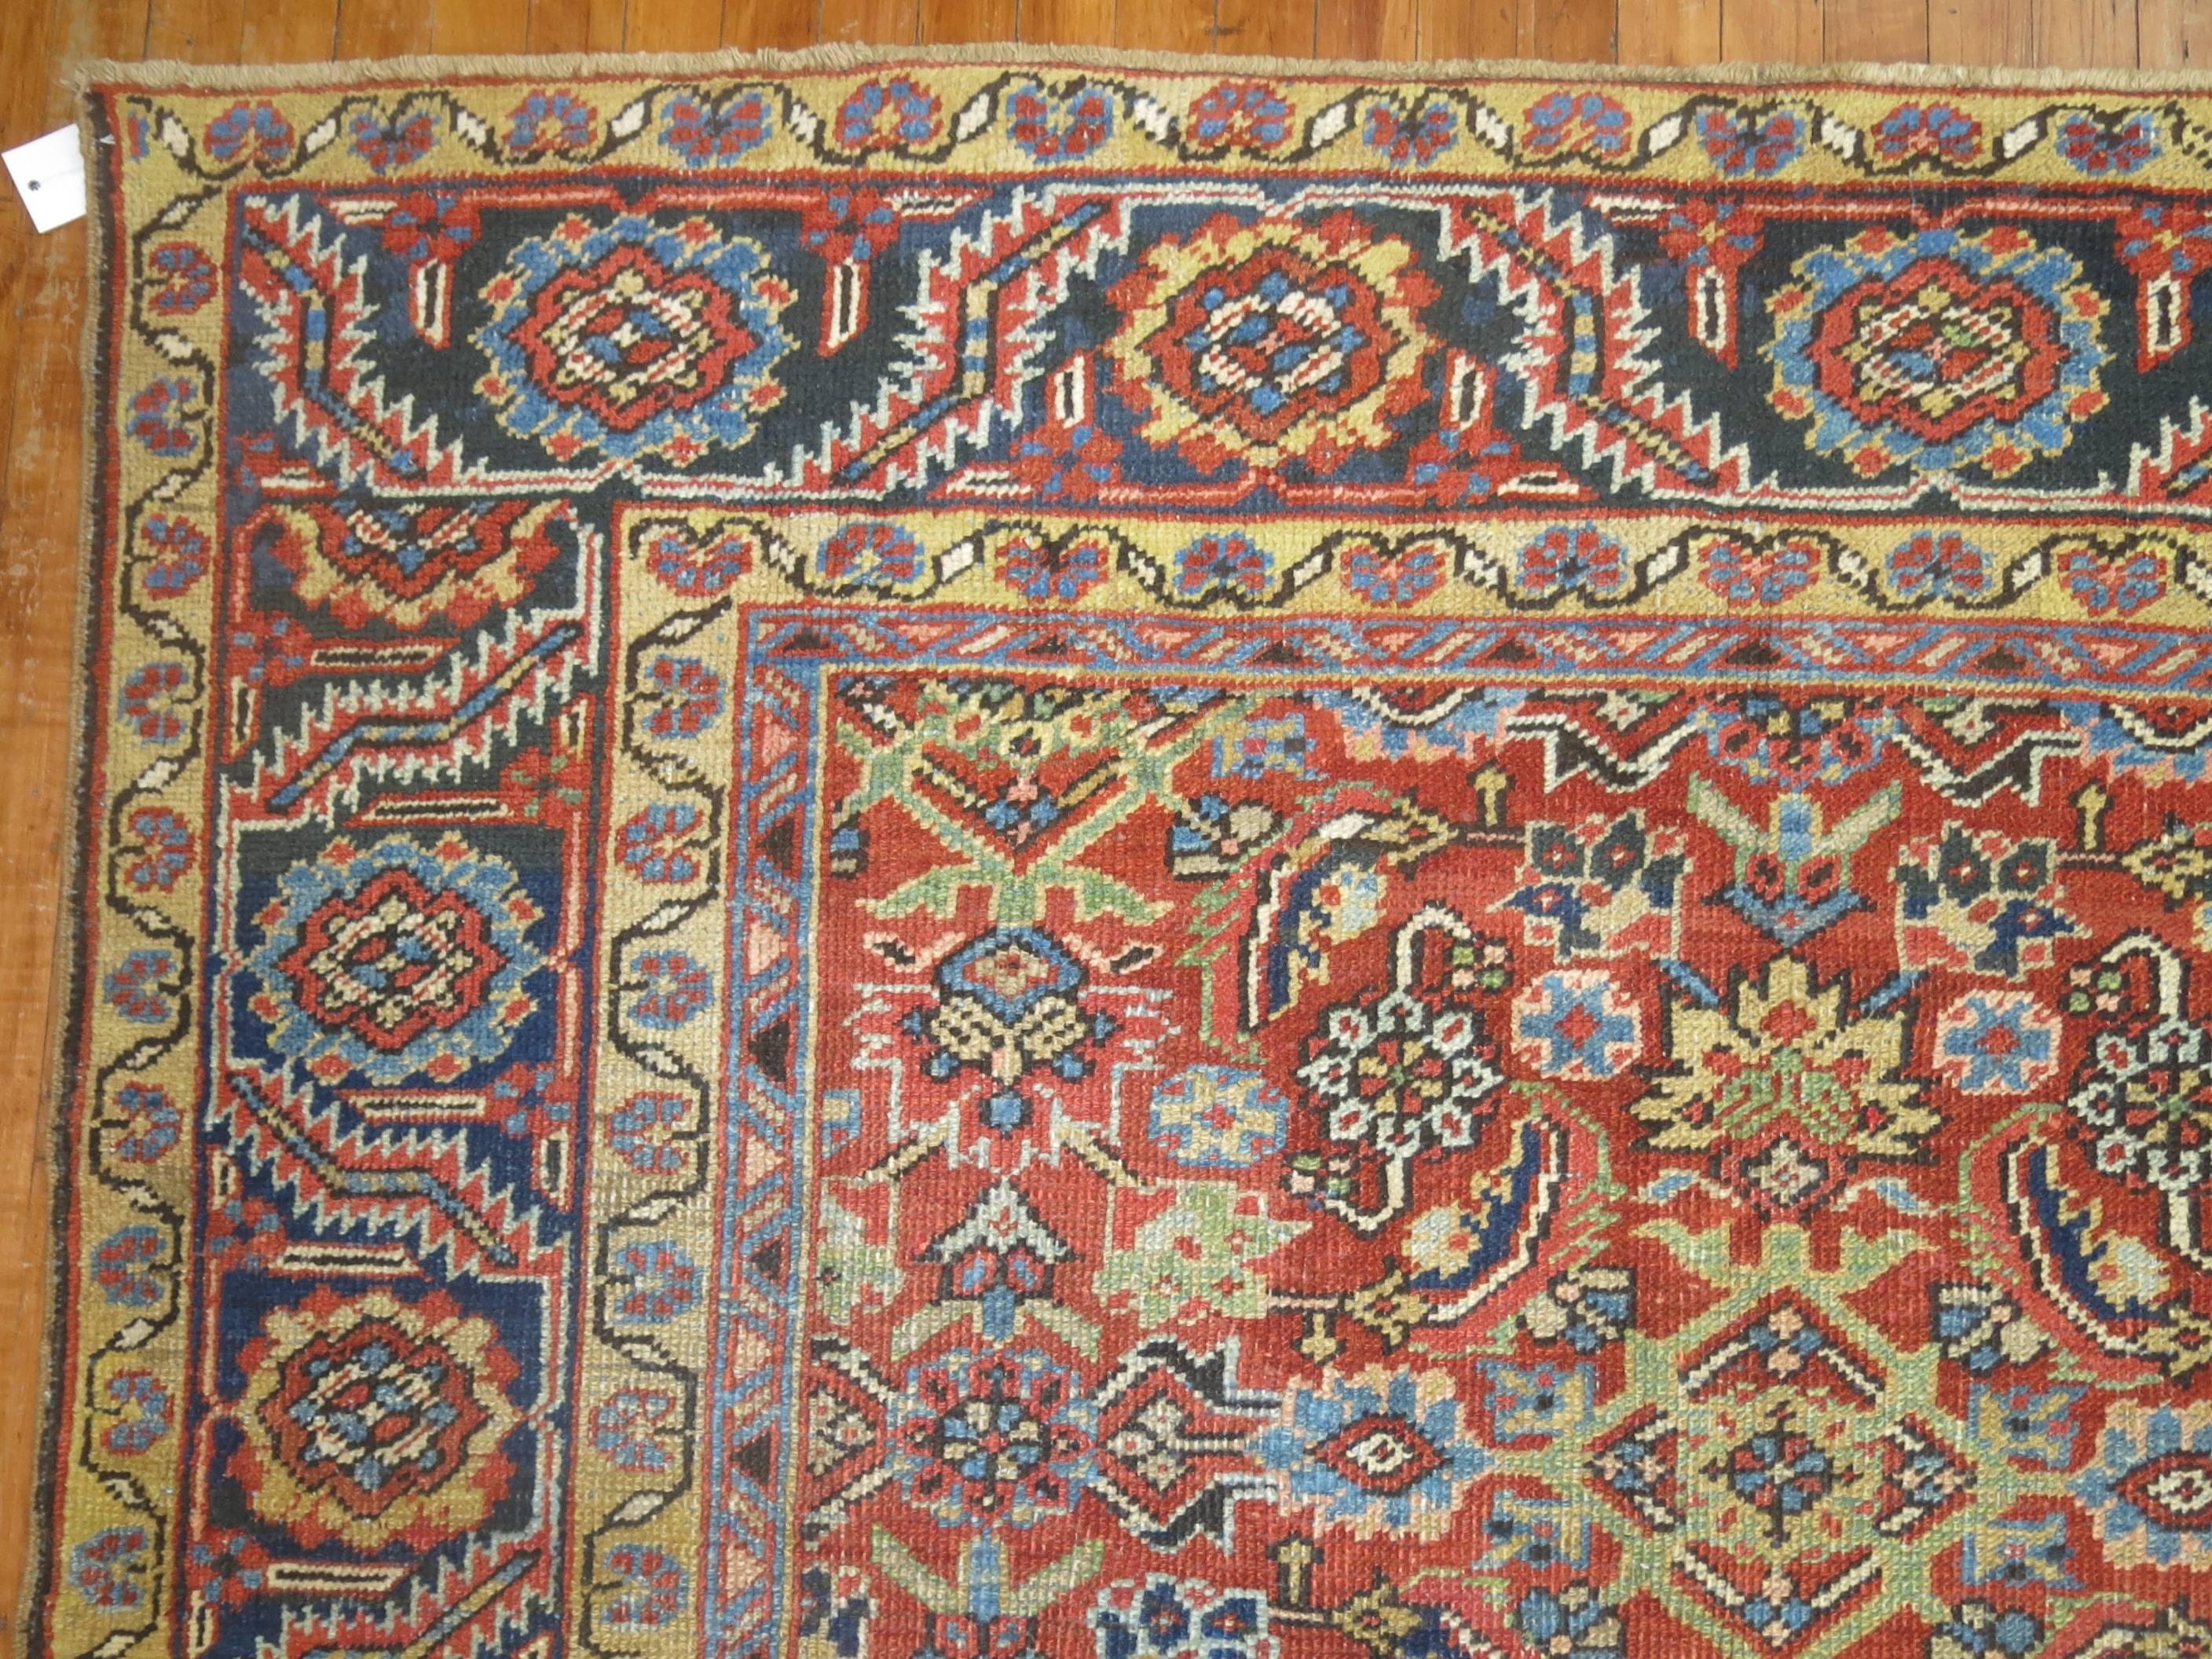 An all-over traditional herati design decorative Persian Heriz rug on an orange field and navy border. Colors in light green, light blue and pink accents.

Measures: 9'3